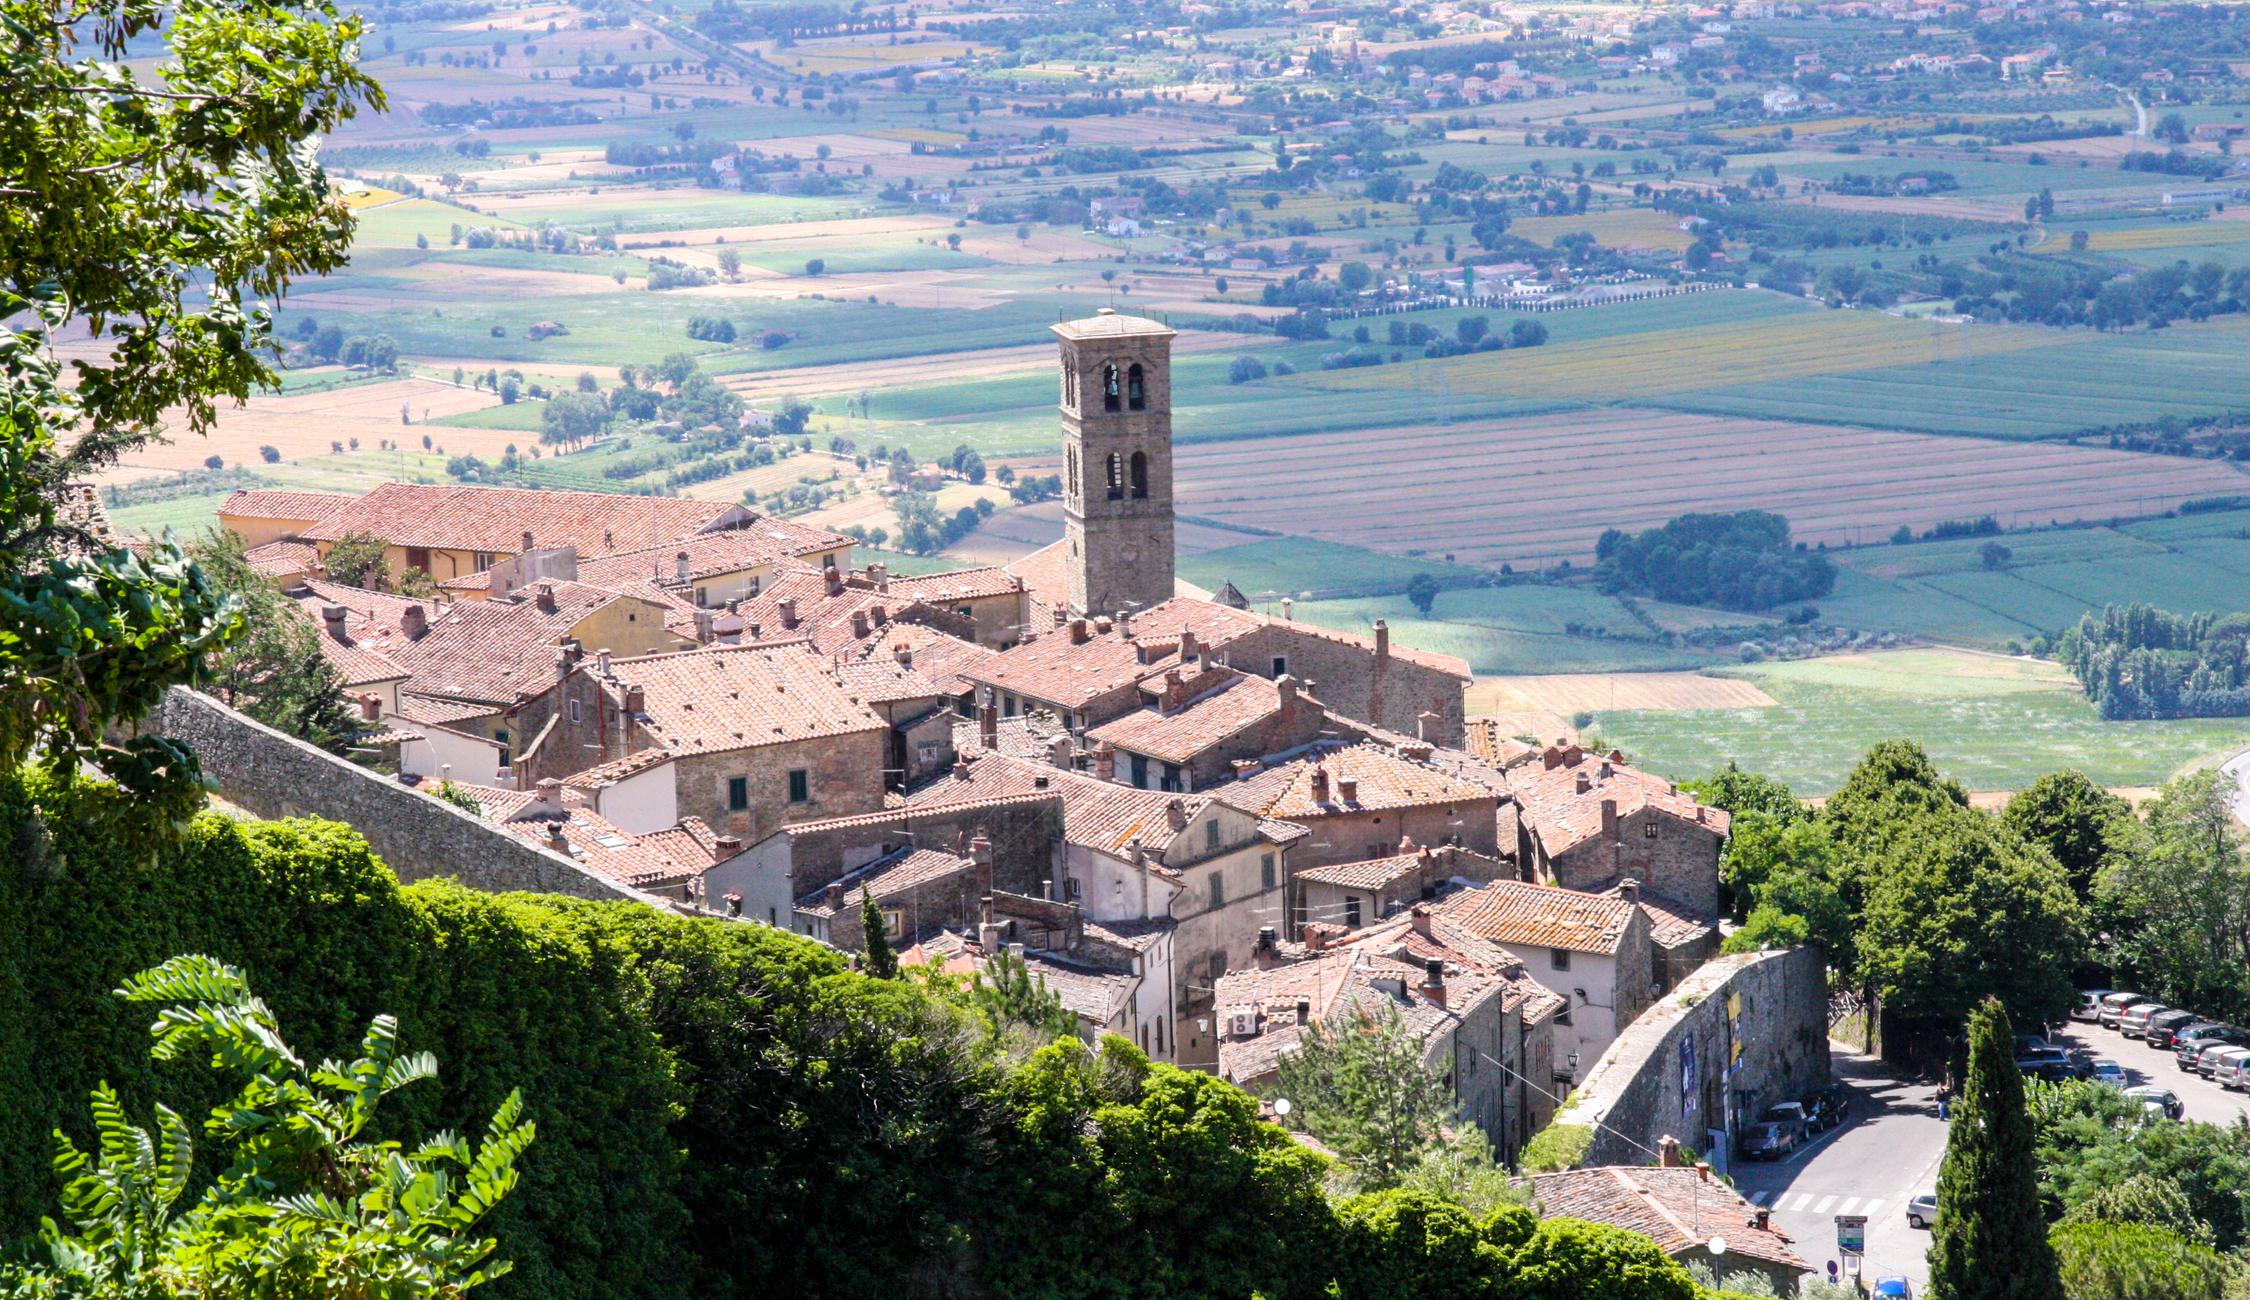 What to do in Cortona, Tuscany | Old town tour